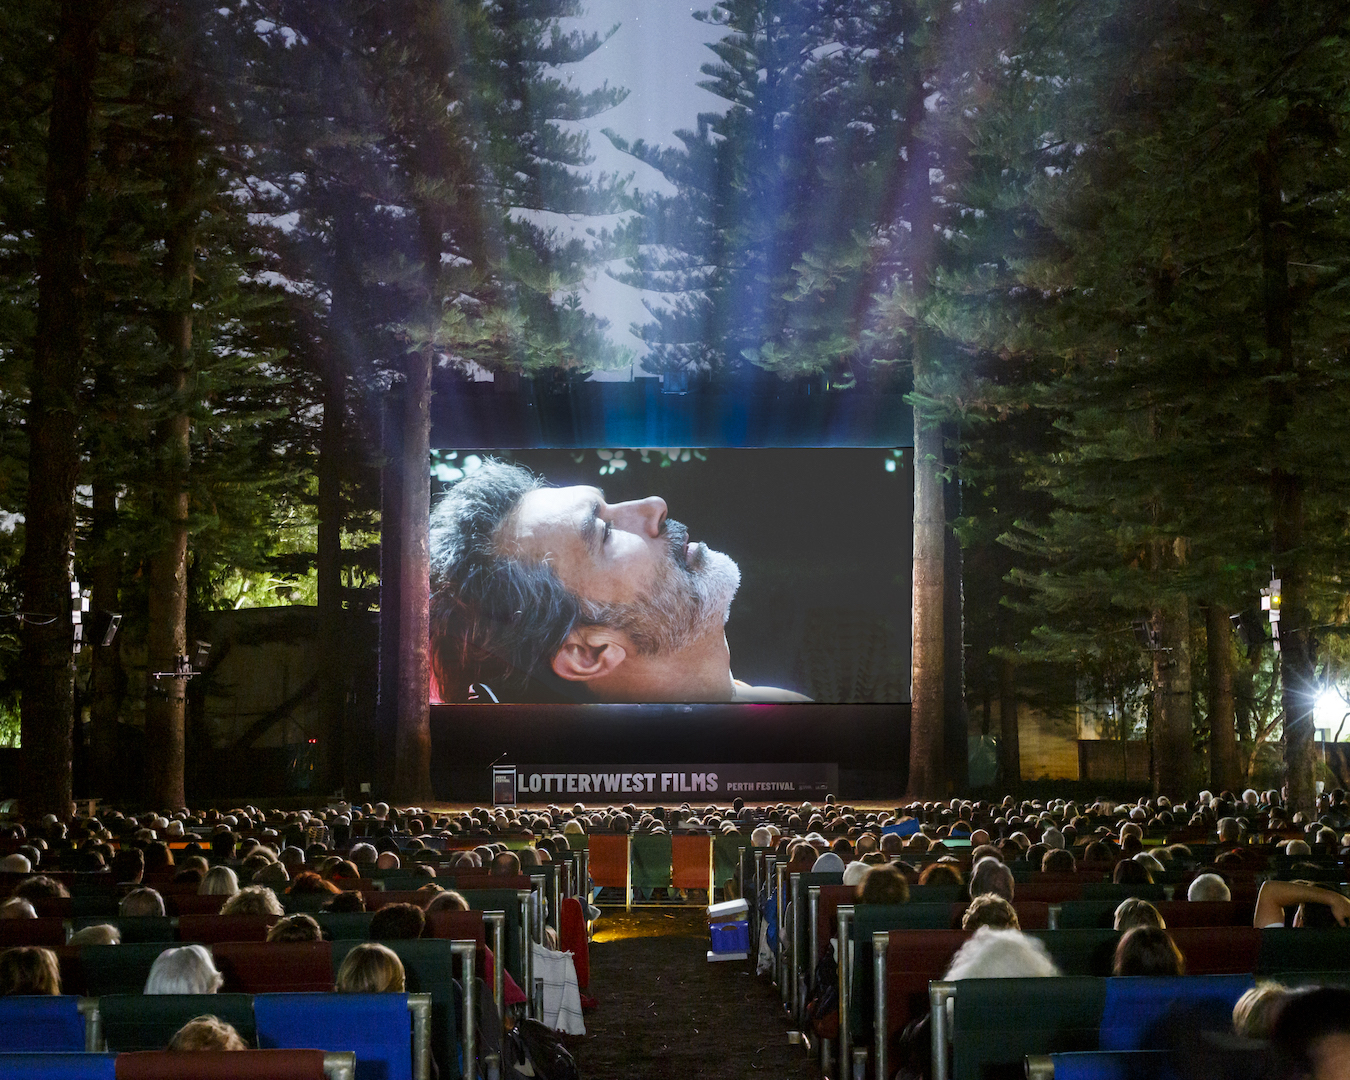 An outdoor cinema in Perth